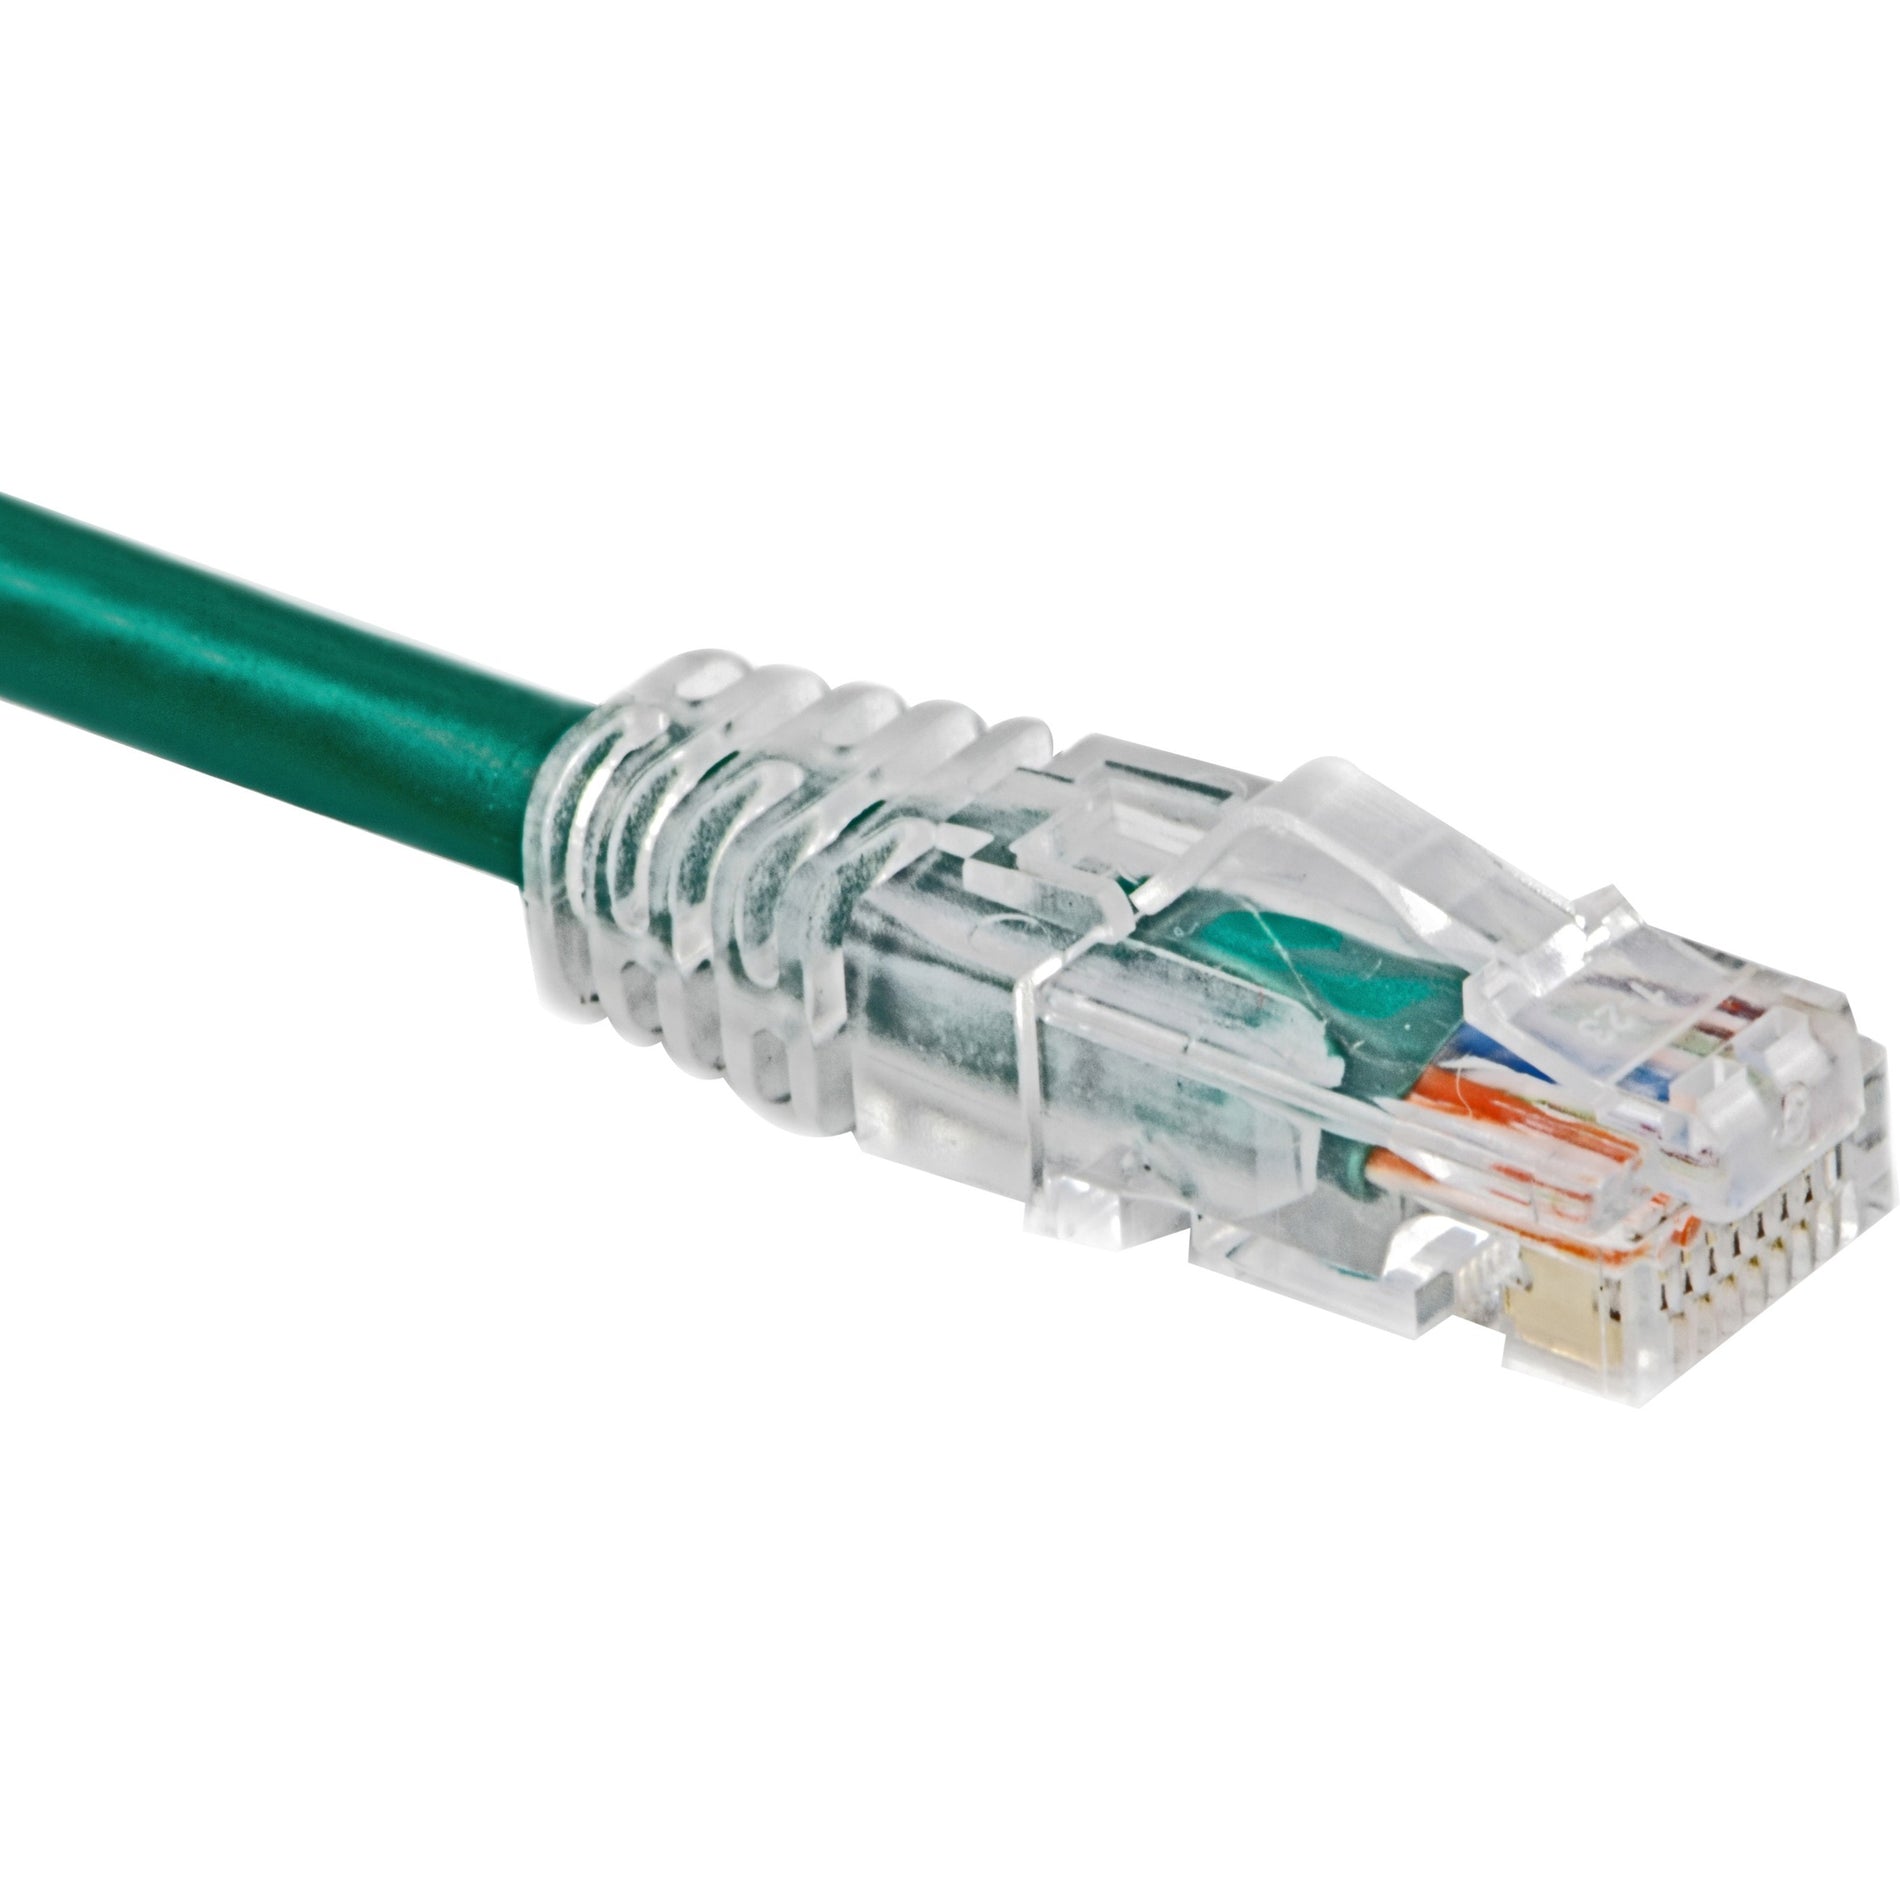 Weltron Cat.5e UTP Patch Network Cable (90-C5ECB-GN-002)